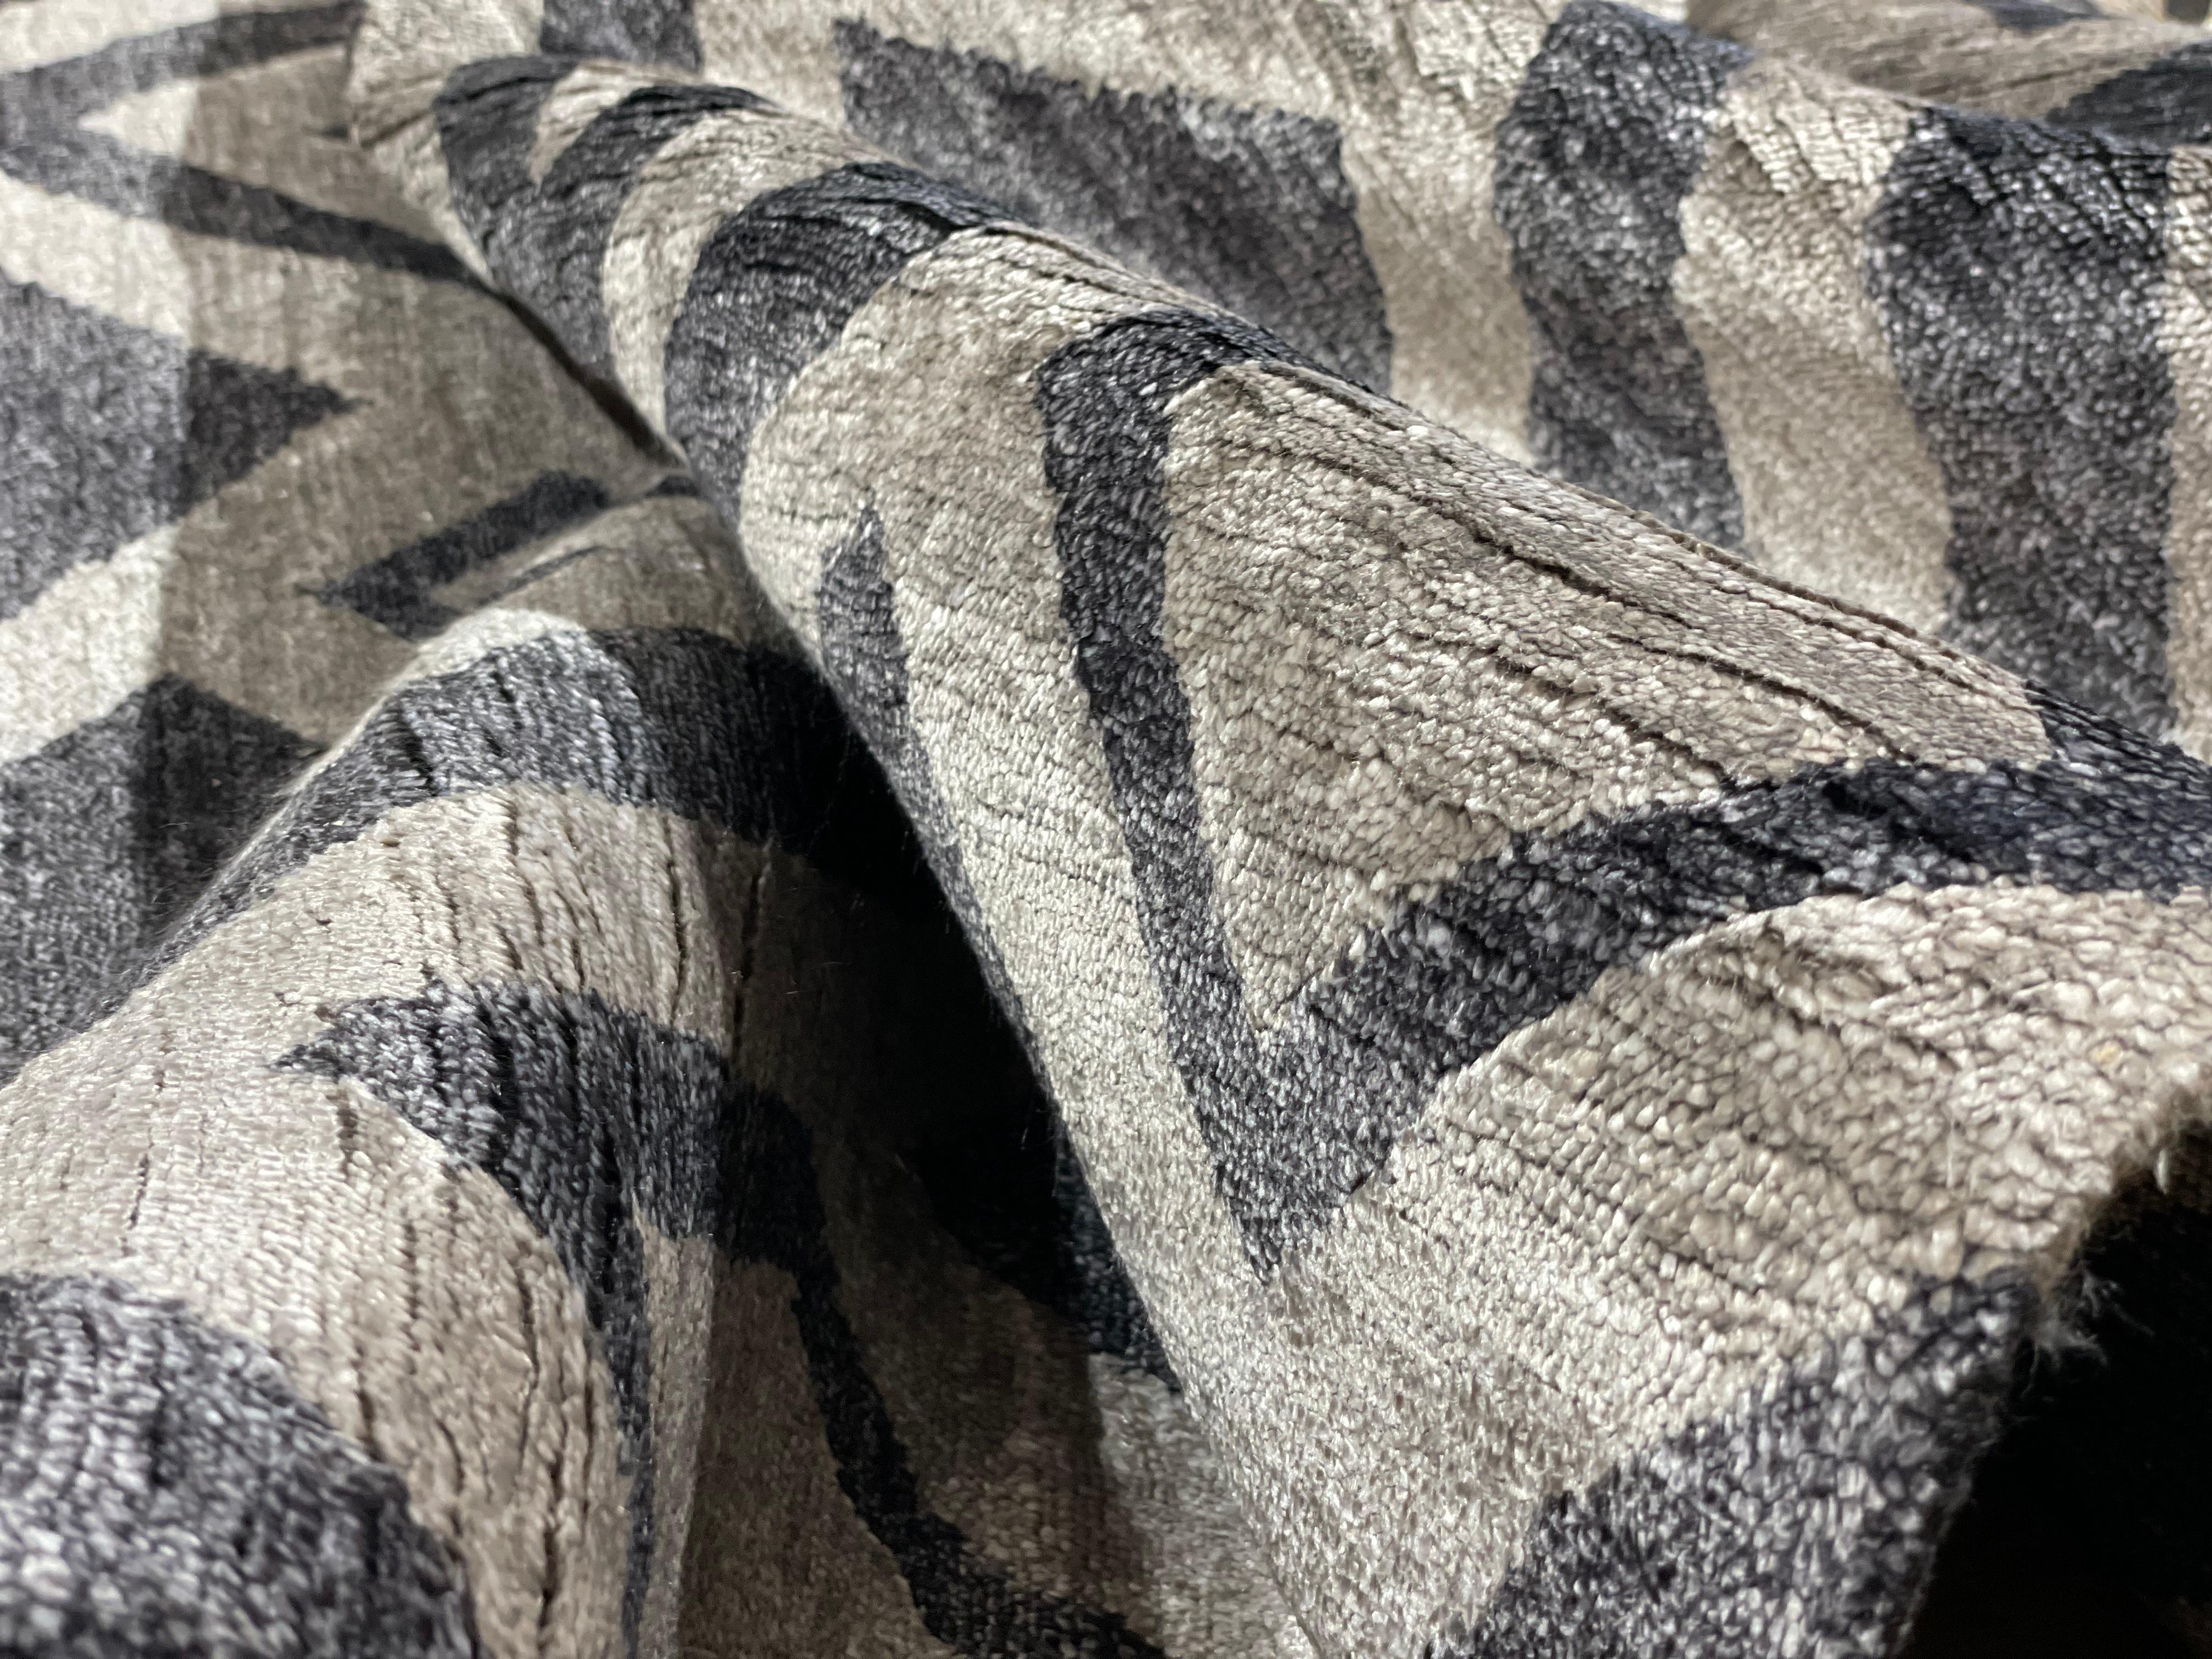 A beautiful contemporary modern design, hand knotted using hand spun botanical bamboo silk by Djoharian Design.

This hand-knotted rug with an organic design and wonderful color combination from gray and charcoal has the look a modern room requires.